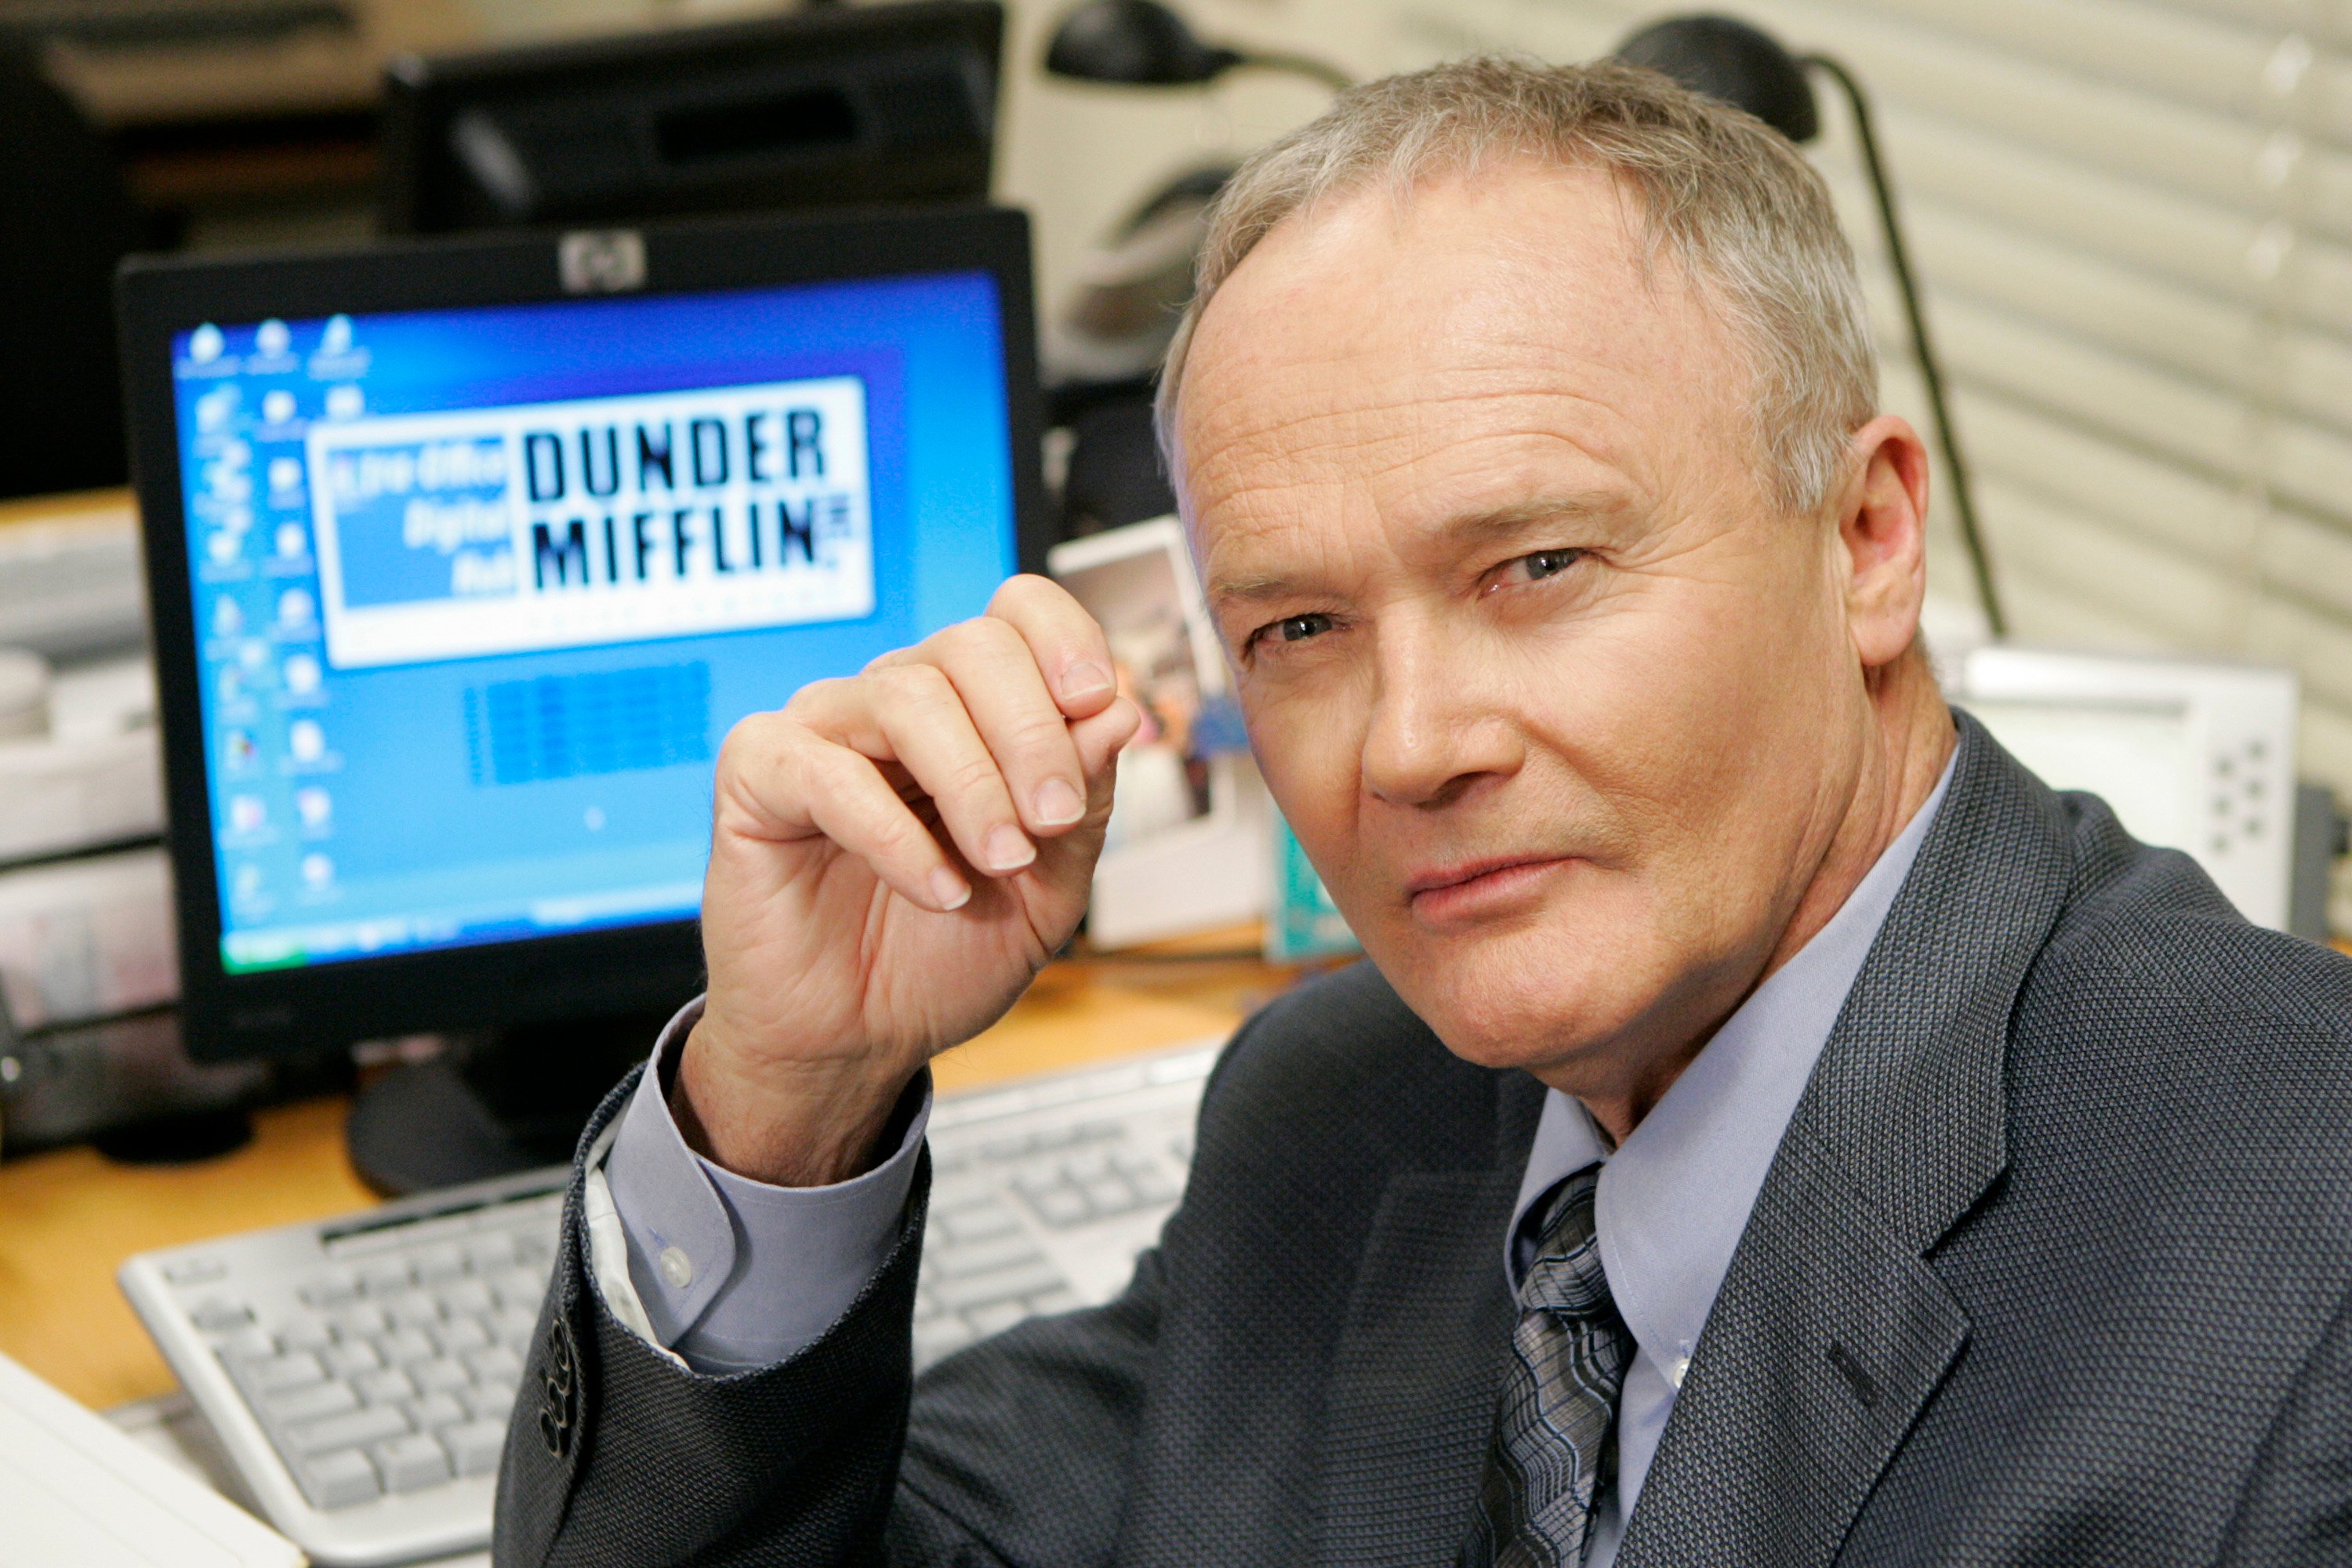 Creed Bratton as Creed Bratton on 'The Office' at a desk in front of a computer that has a Dunder Mifflin screen